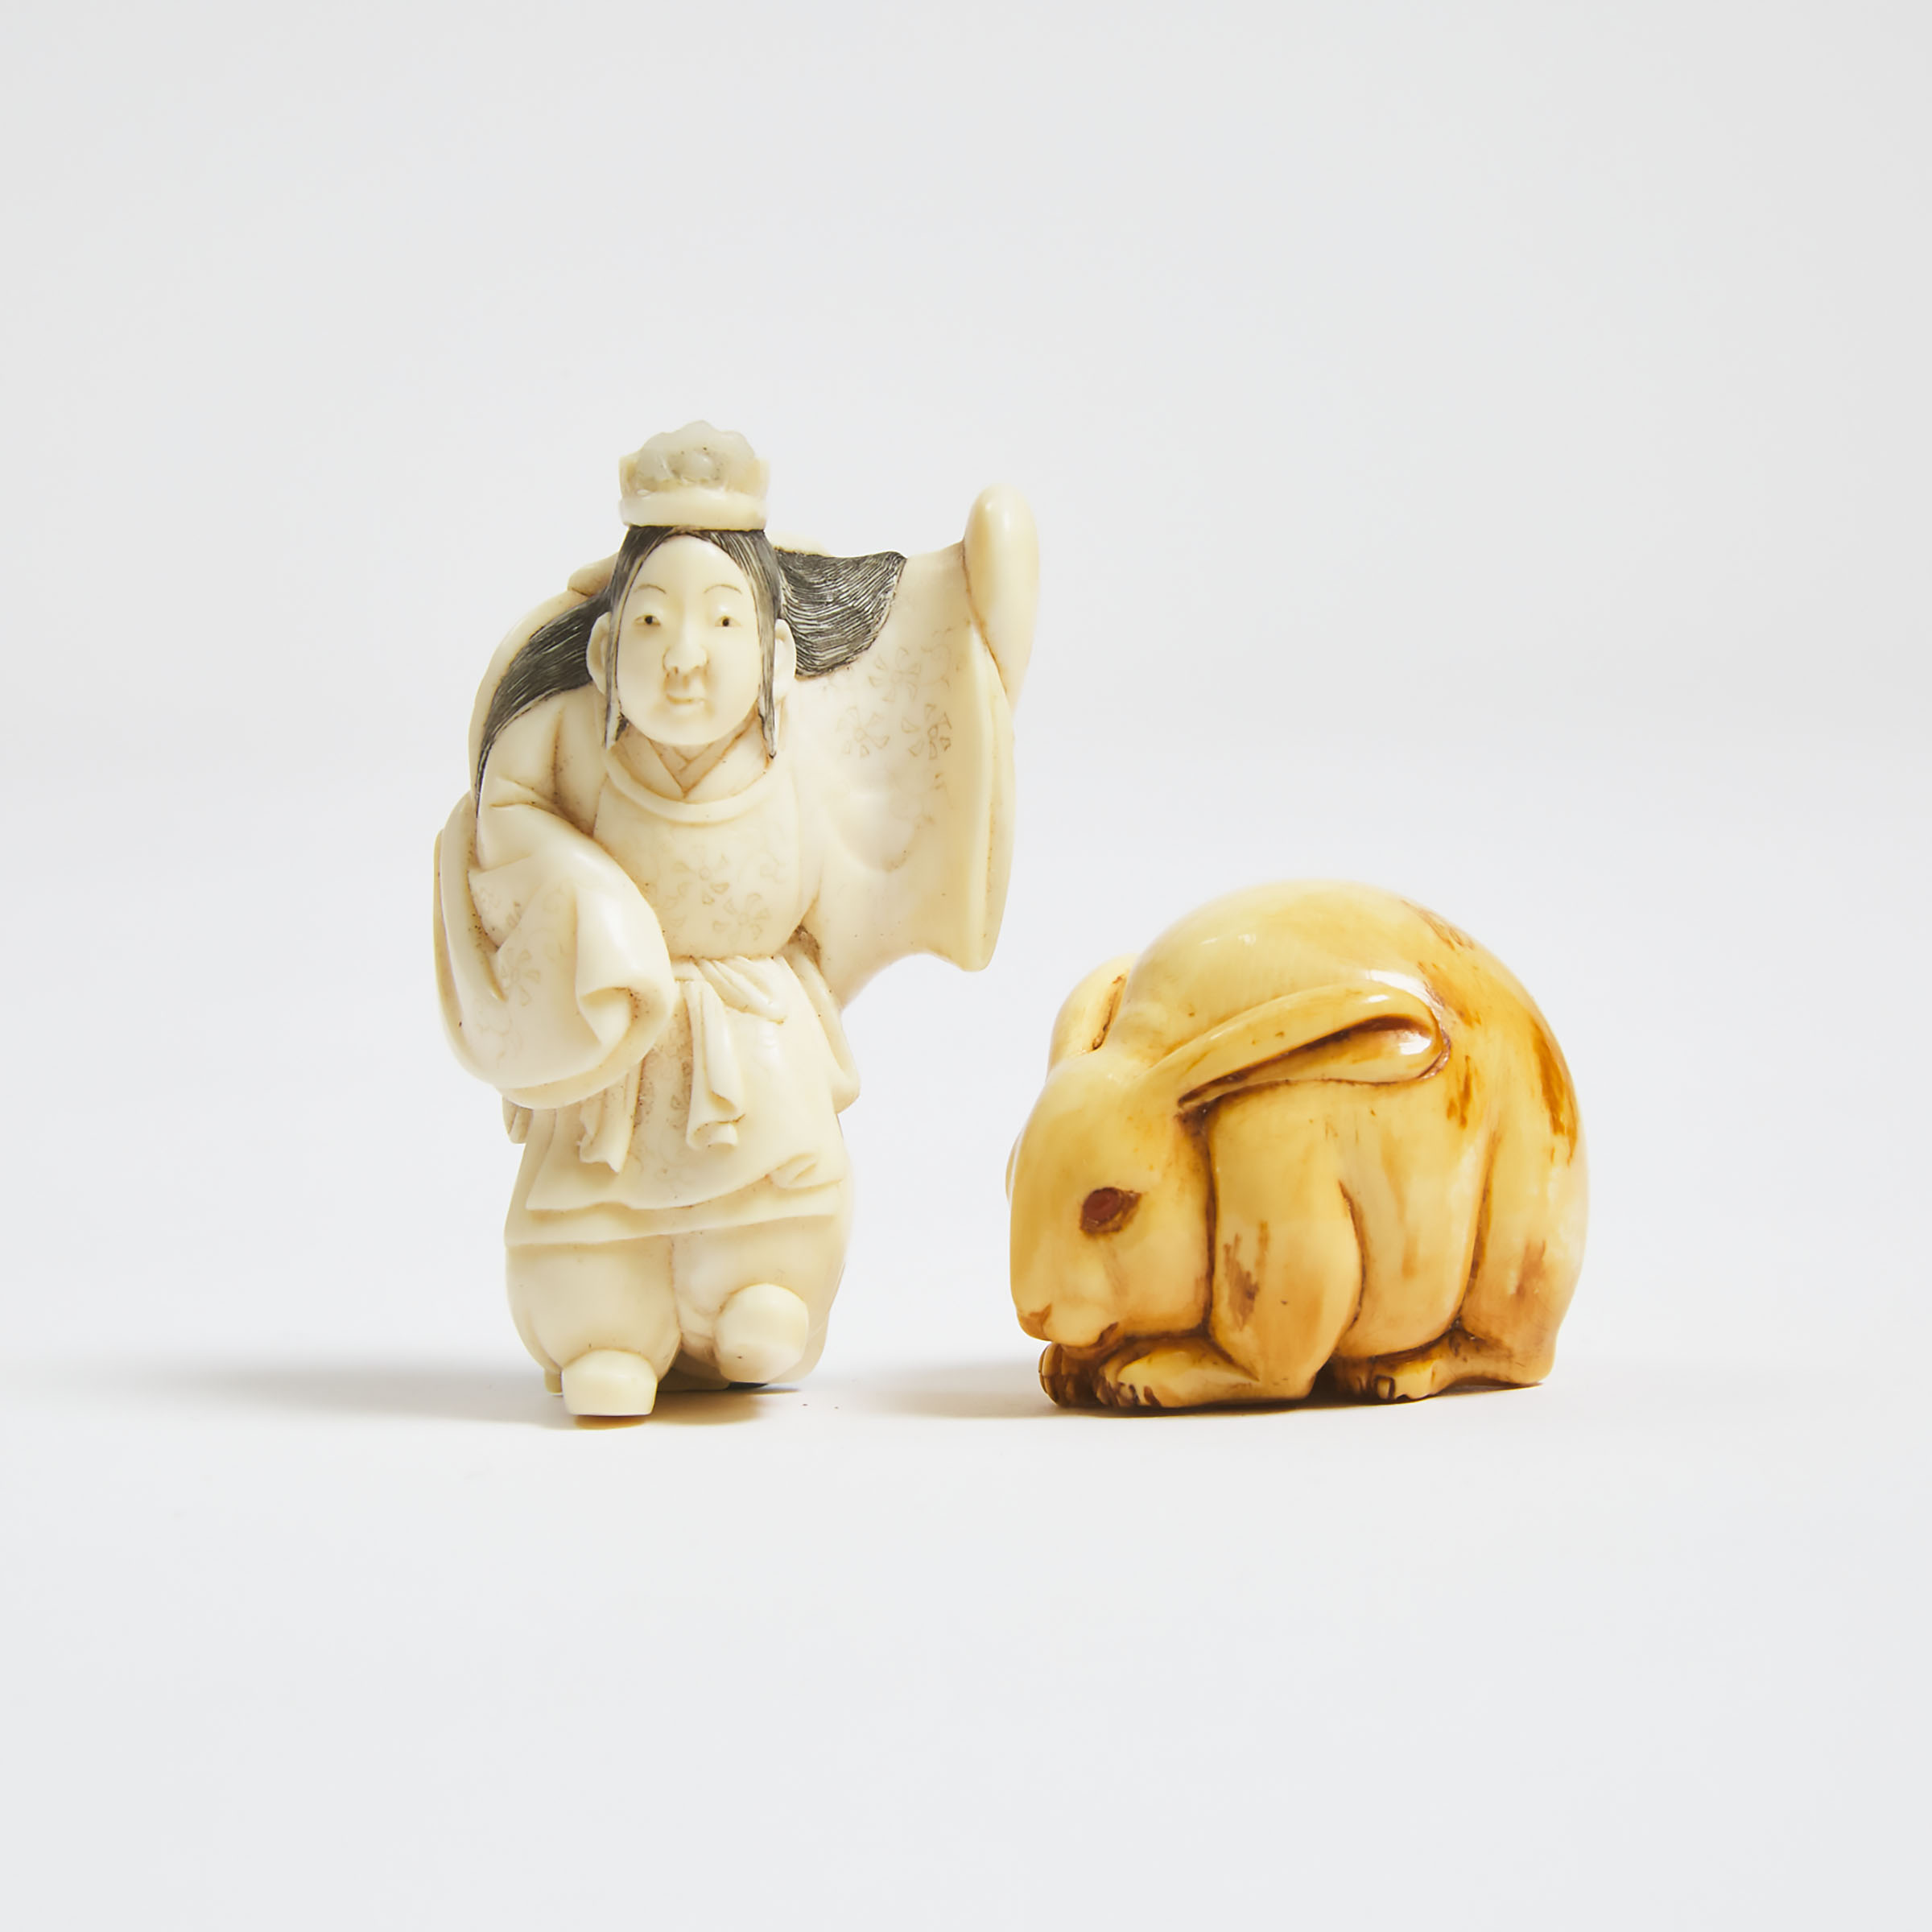 An Ivory Netsuke of a Rabbit, Together With a Butterfly Dancer, Signed Ryomin, Mid to Late 19th Century